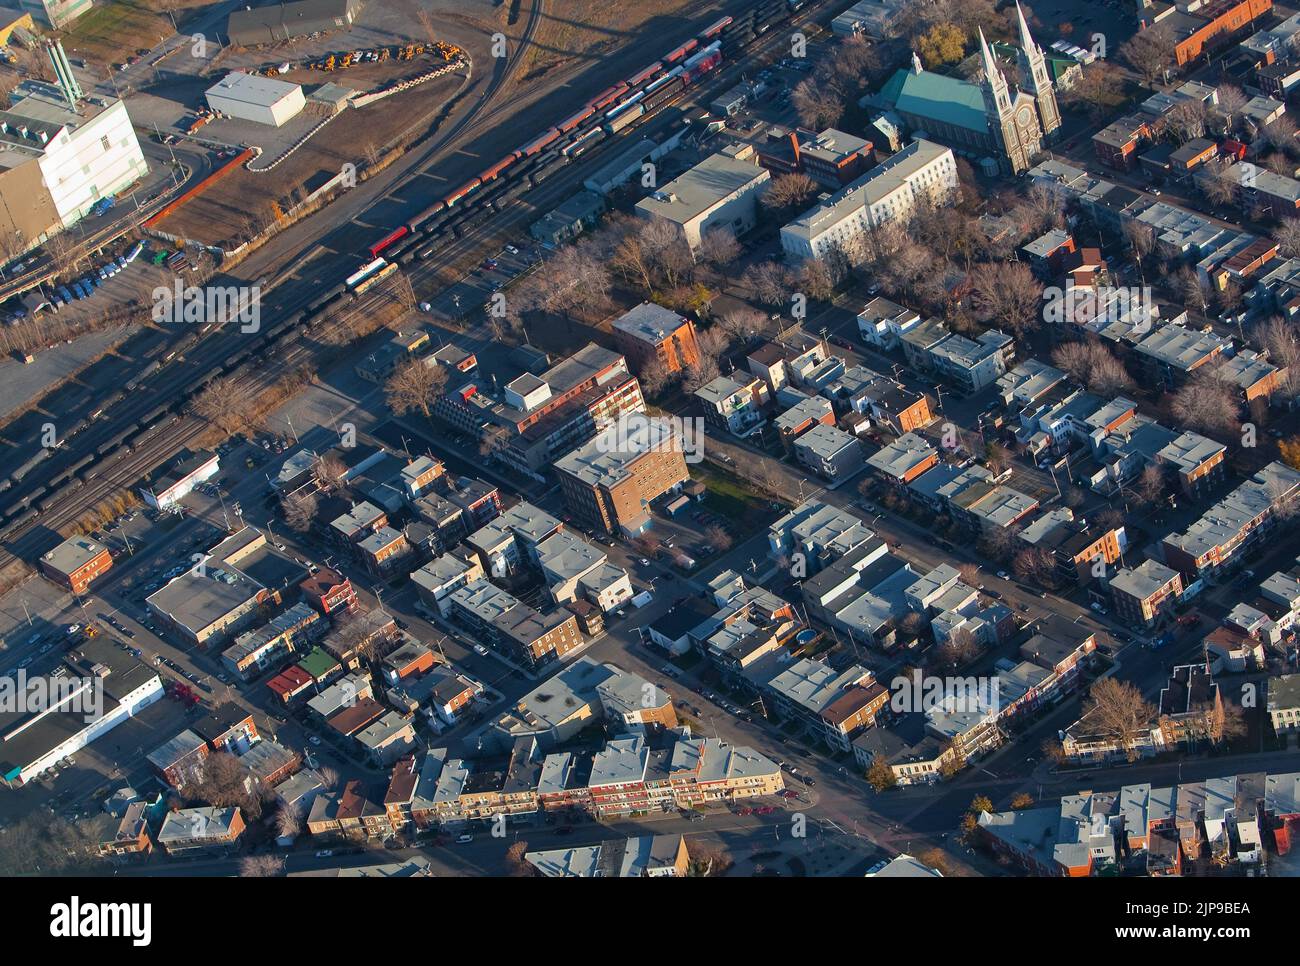 Quartier Limoilou district in Quebec city is pictured in this aerial photo November 11, 2009. Known as a blue collars neighbourhood, the gridded pattern layout district is the second oldest in terms of architecture and second most densely populated borough. Stock Photo